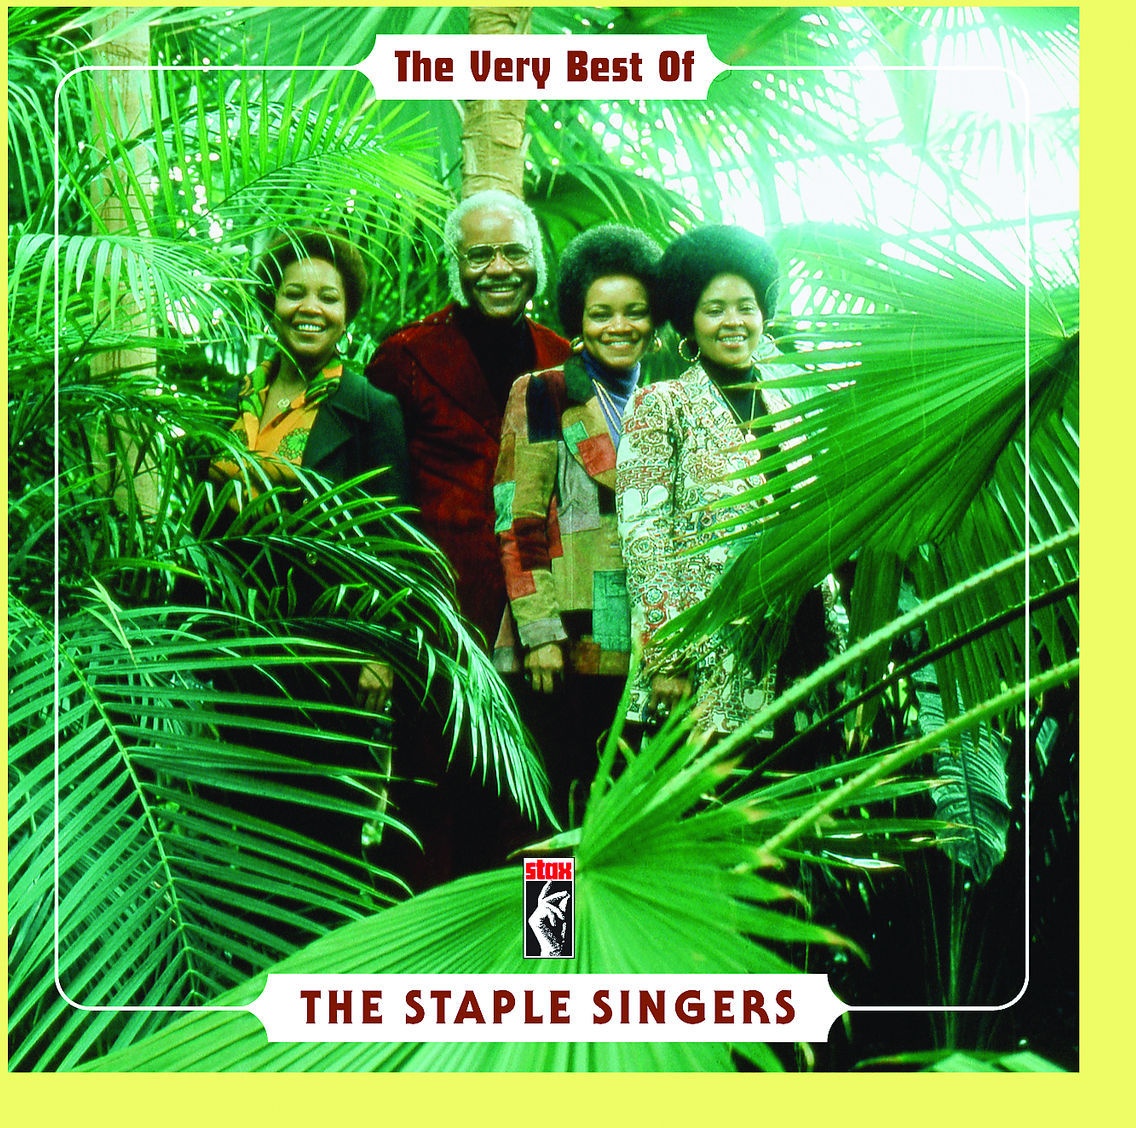 The Very Best Of The Staple Singers - The Staple Singers. (CD)